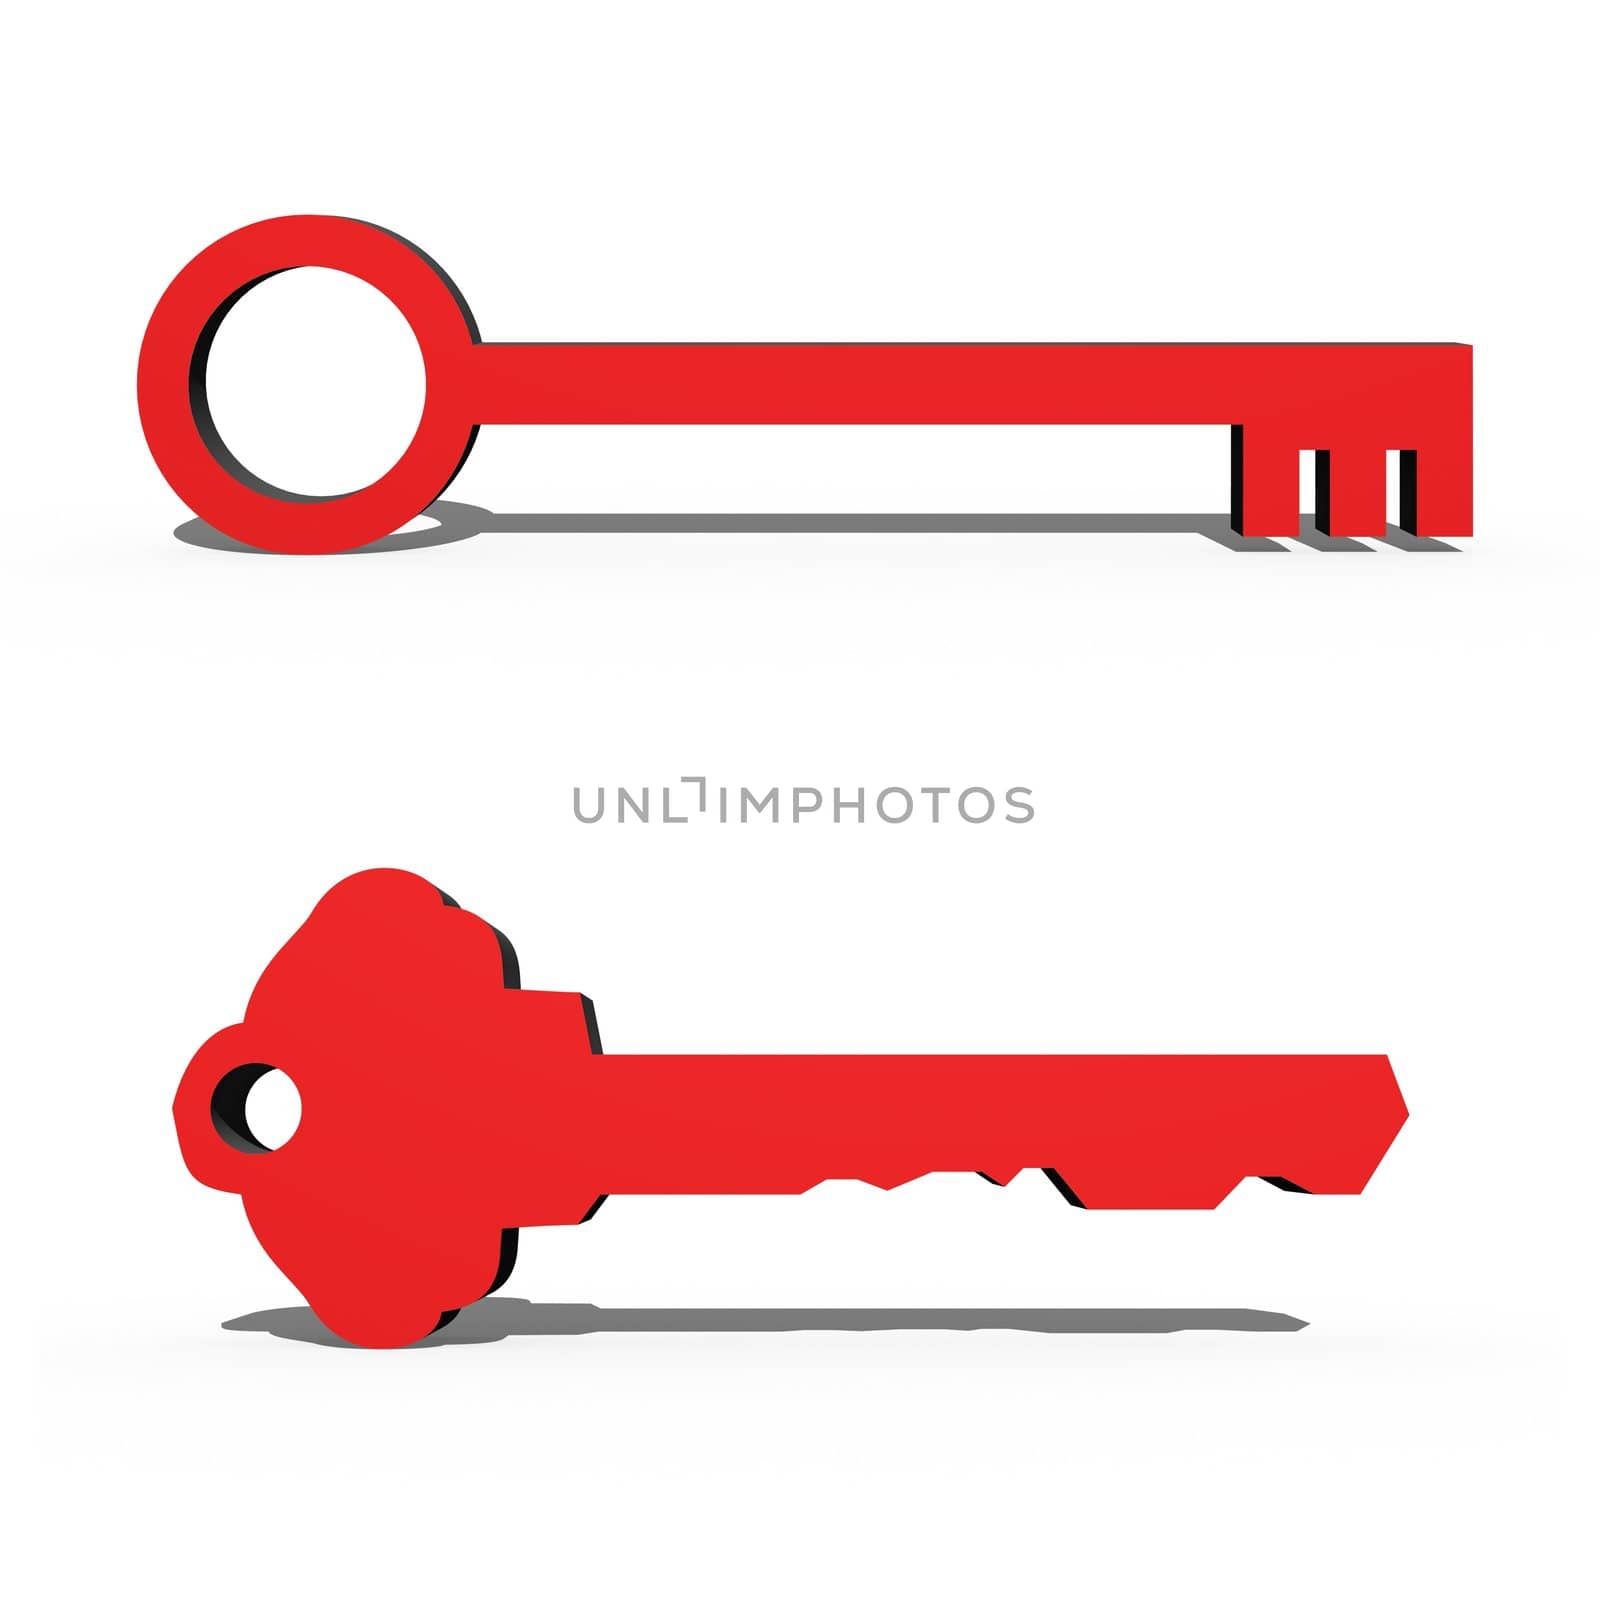 3D keys isolated against a white background